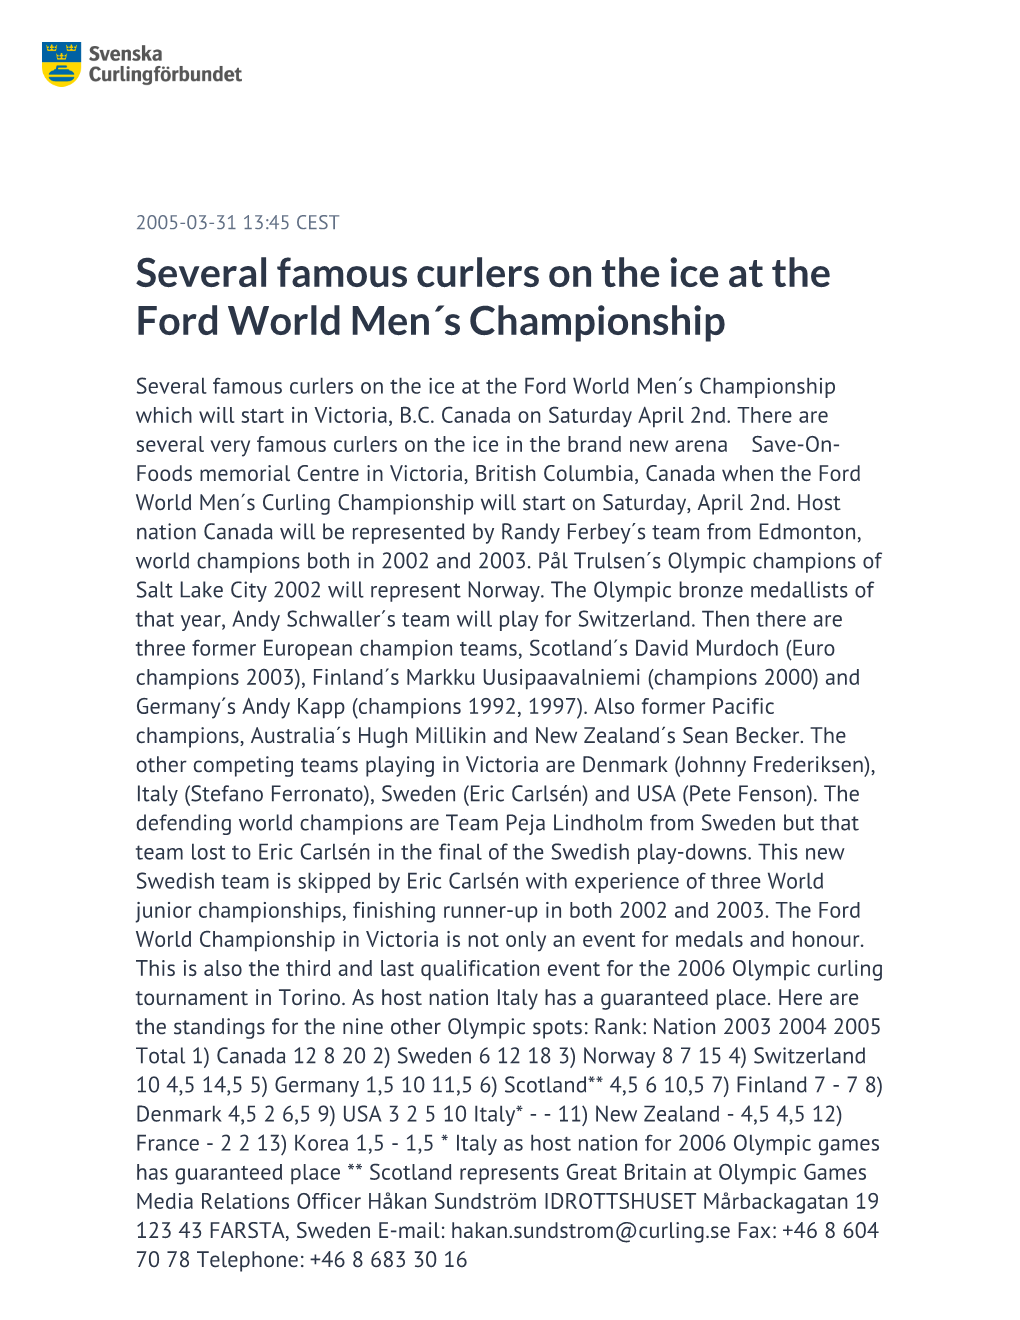 Several Famous Curlers on the Ice at the Ford World Men´S Championship